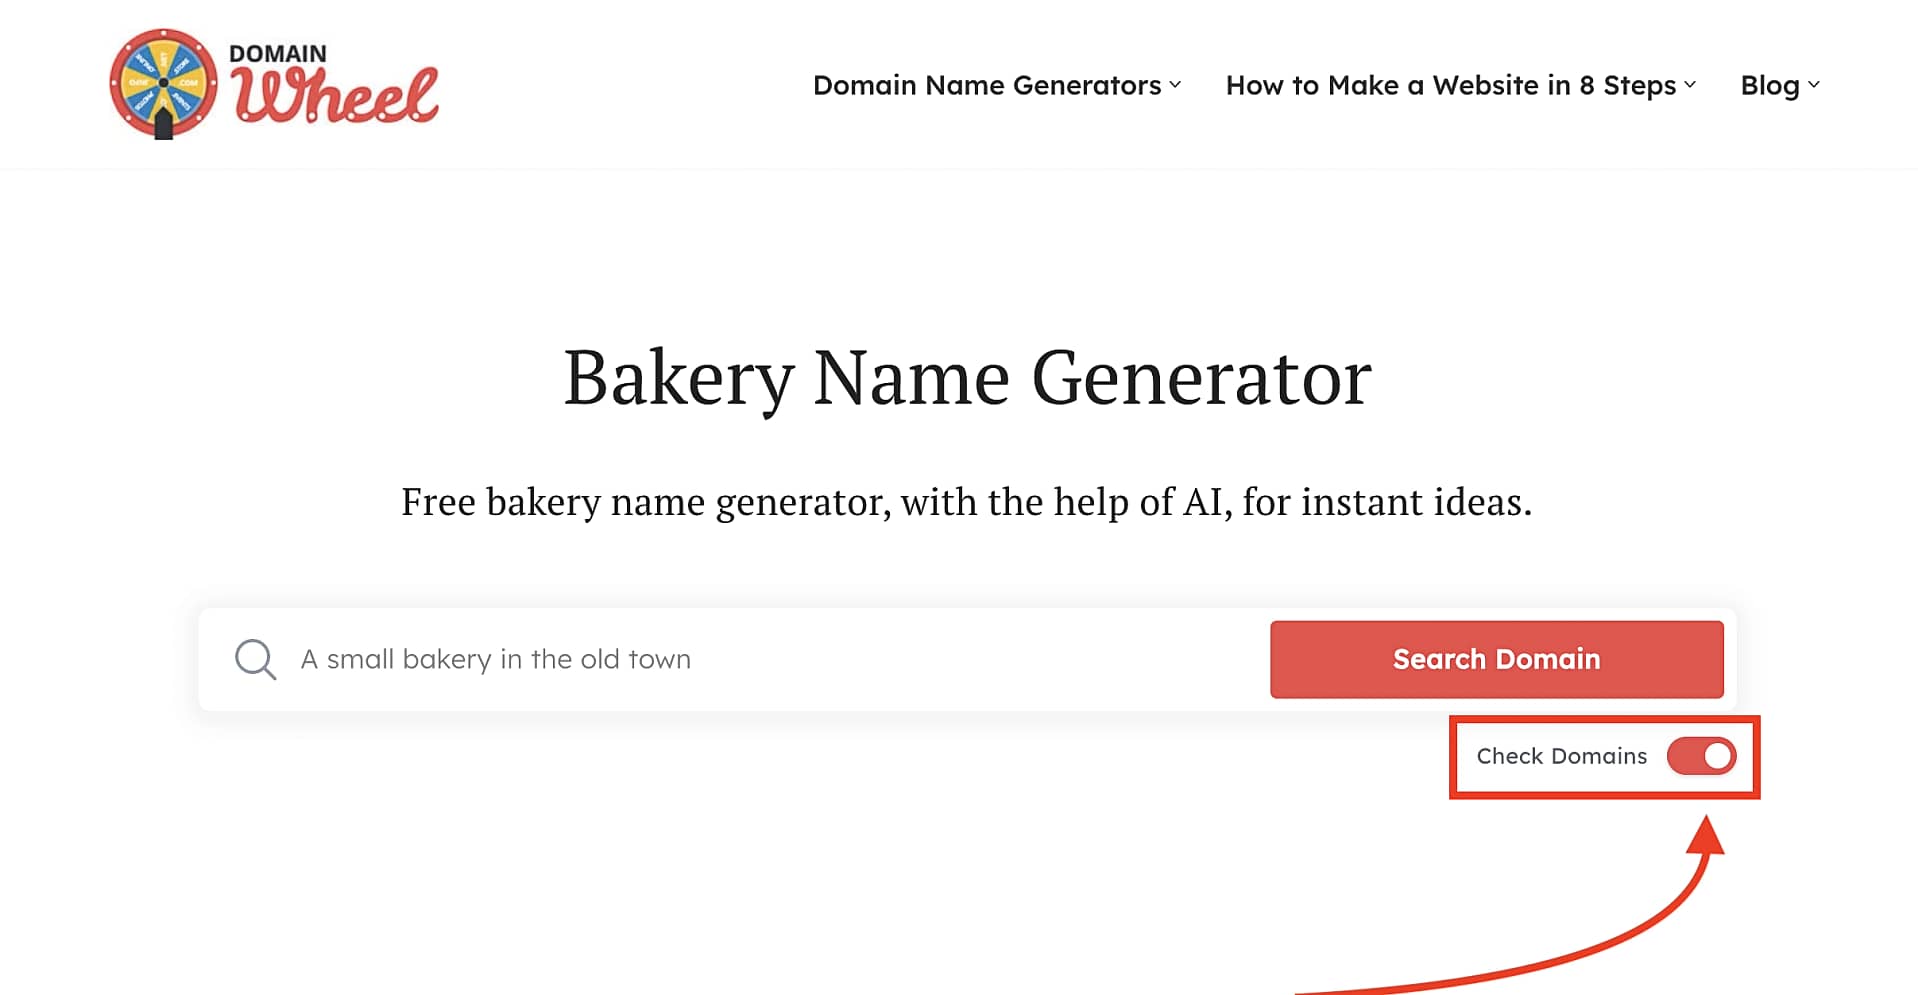 Toggling the "Check Domains" option on the bakery name generator.